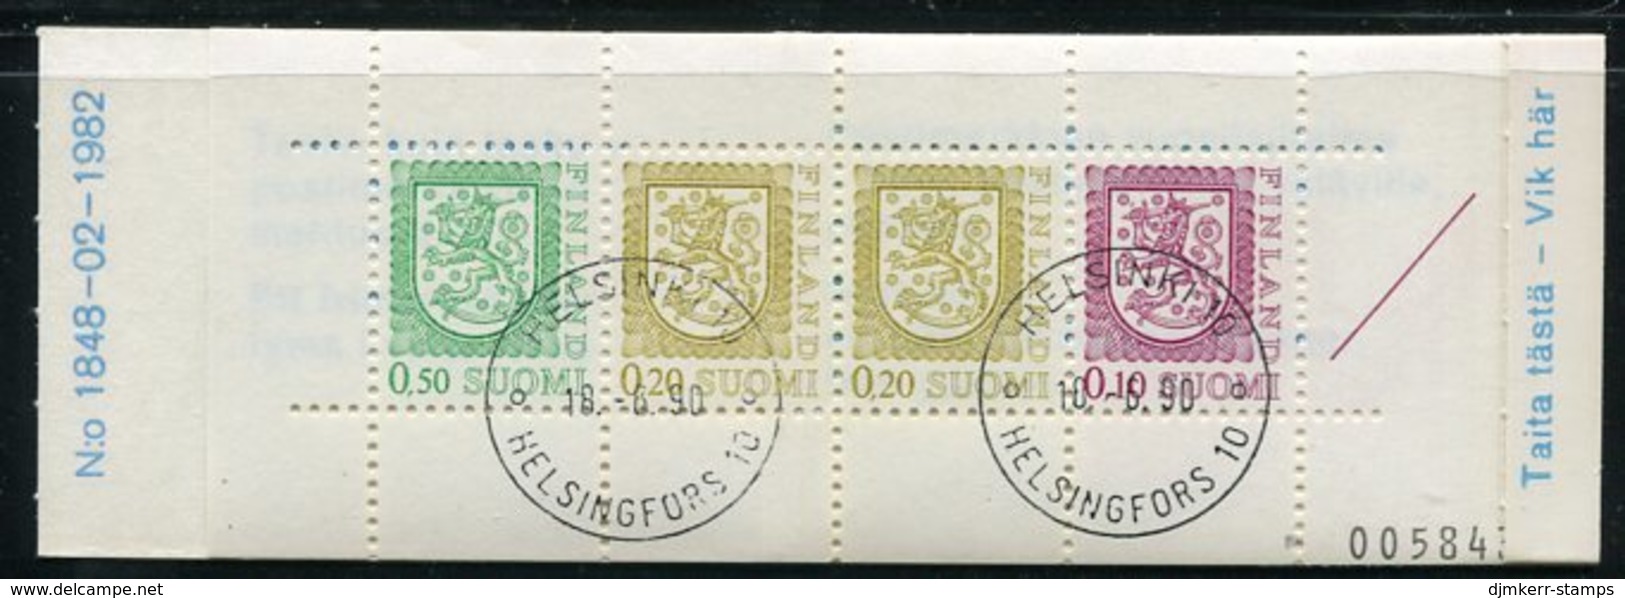 FINLAND 1983 Lion Definitive 1 Mk. Complete Booklet, Cancelled.  Michel MH 14 - Cuadernillos